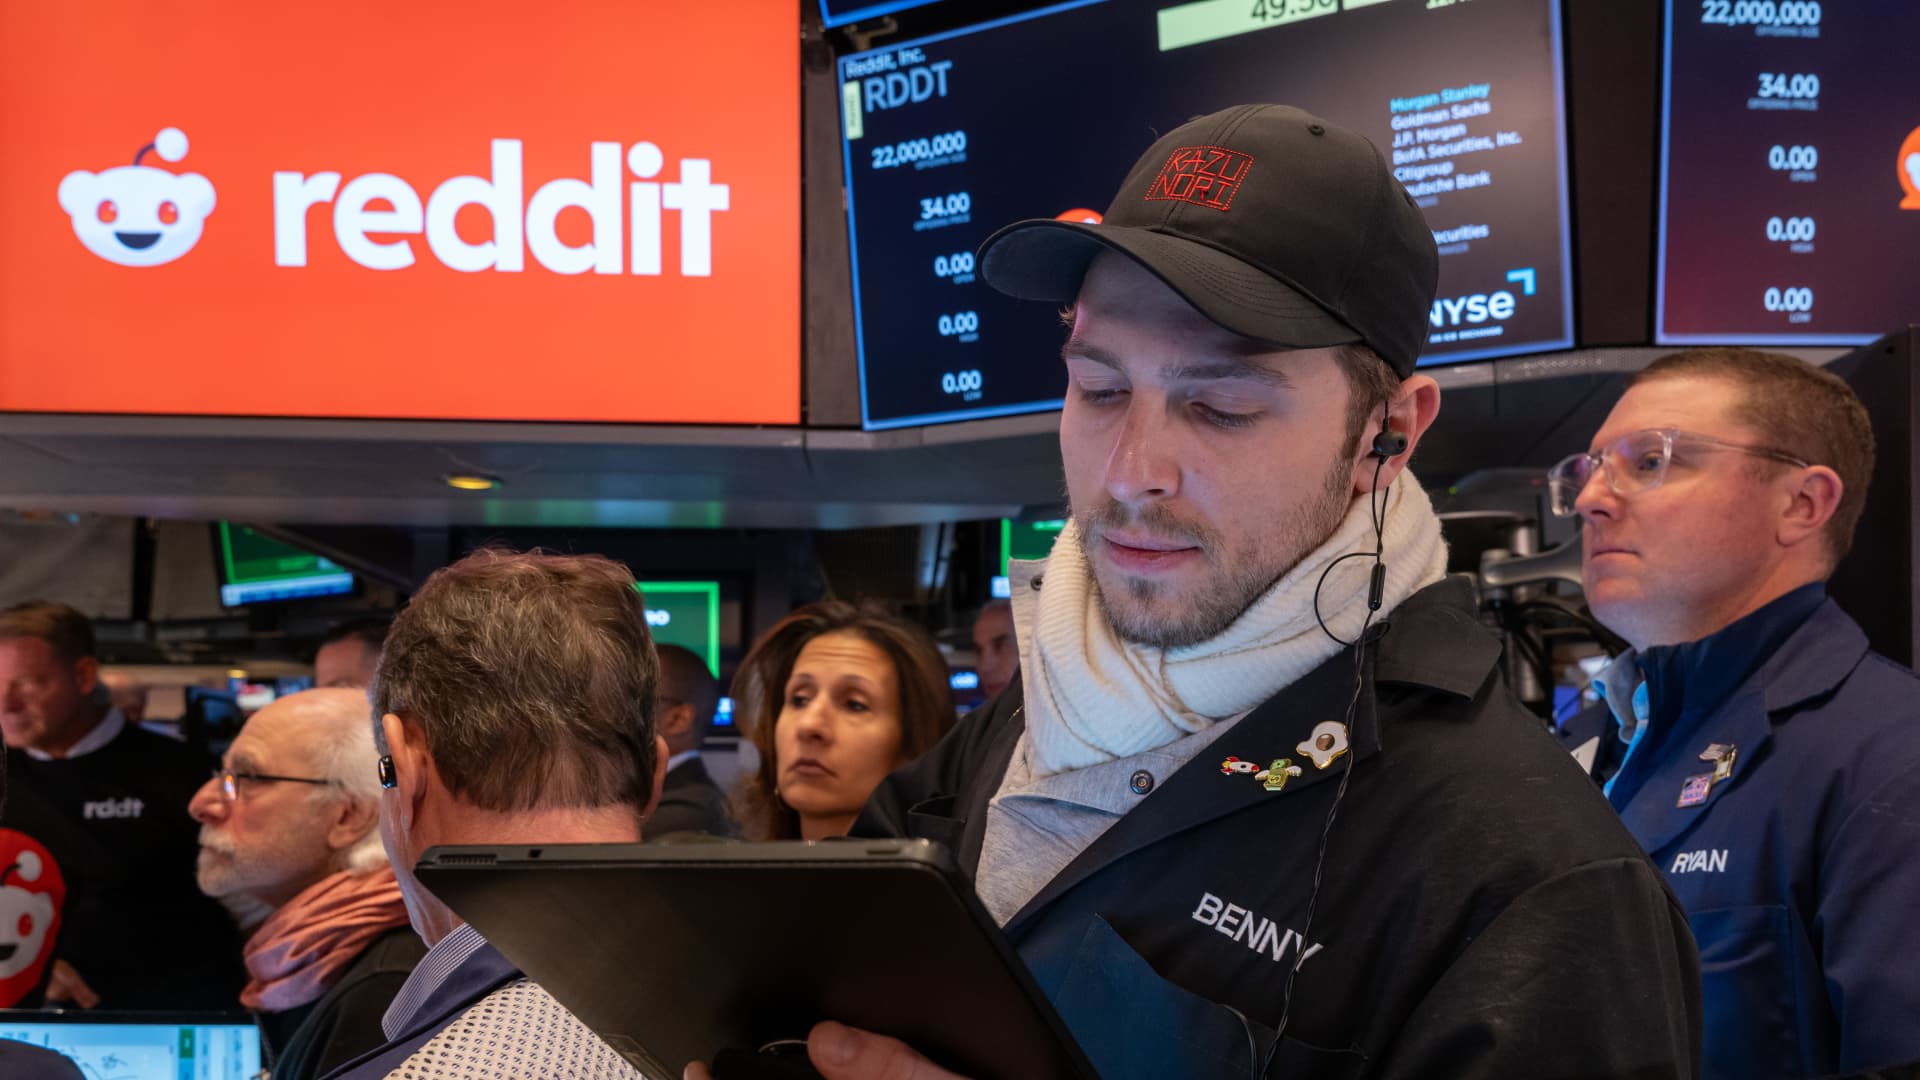 Reddit soars after announcing OpenAI deal that allows use of its data for training AI models